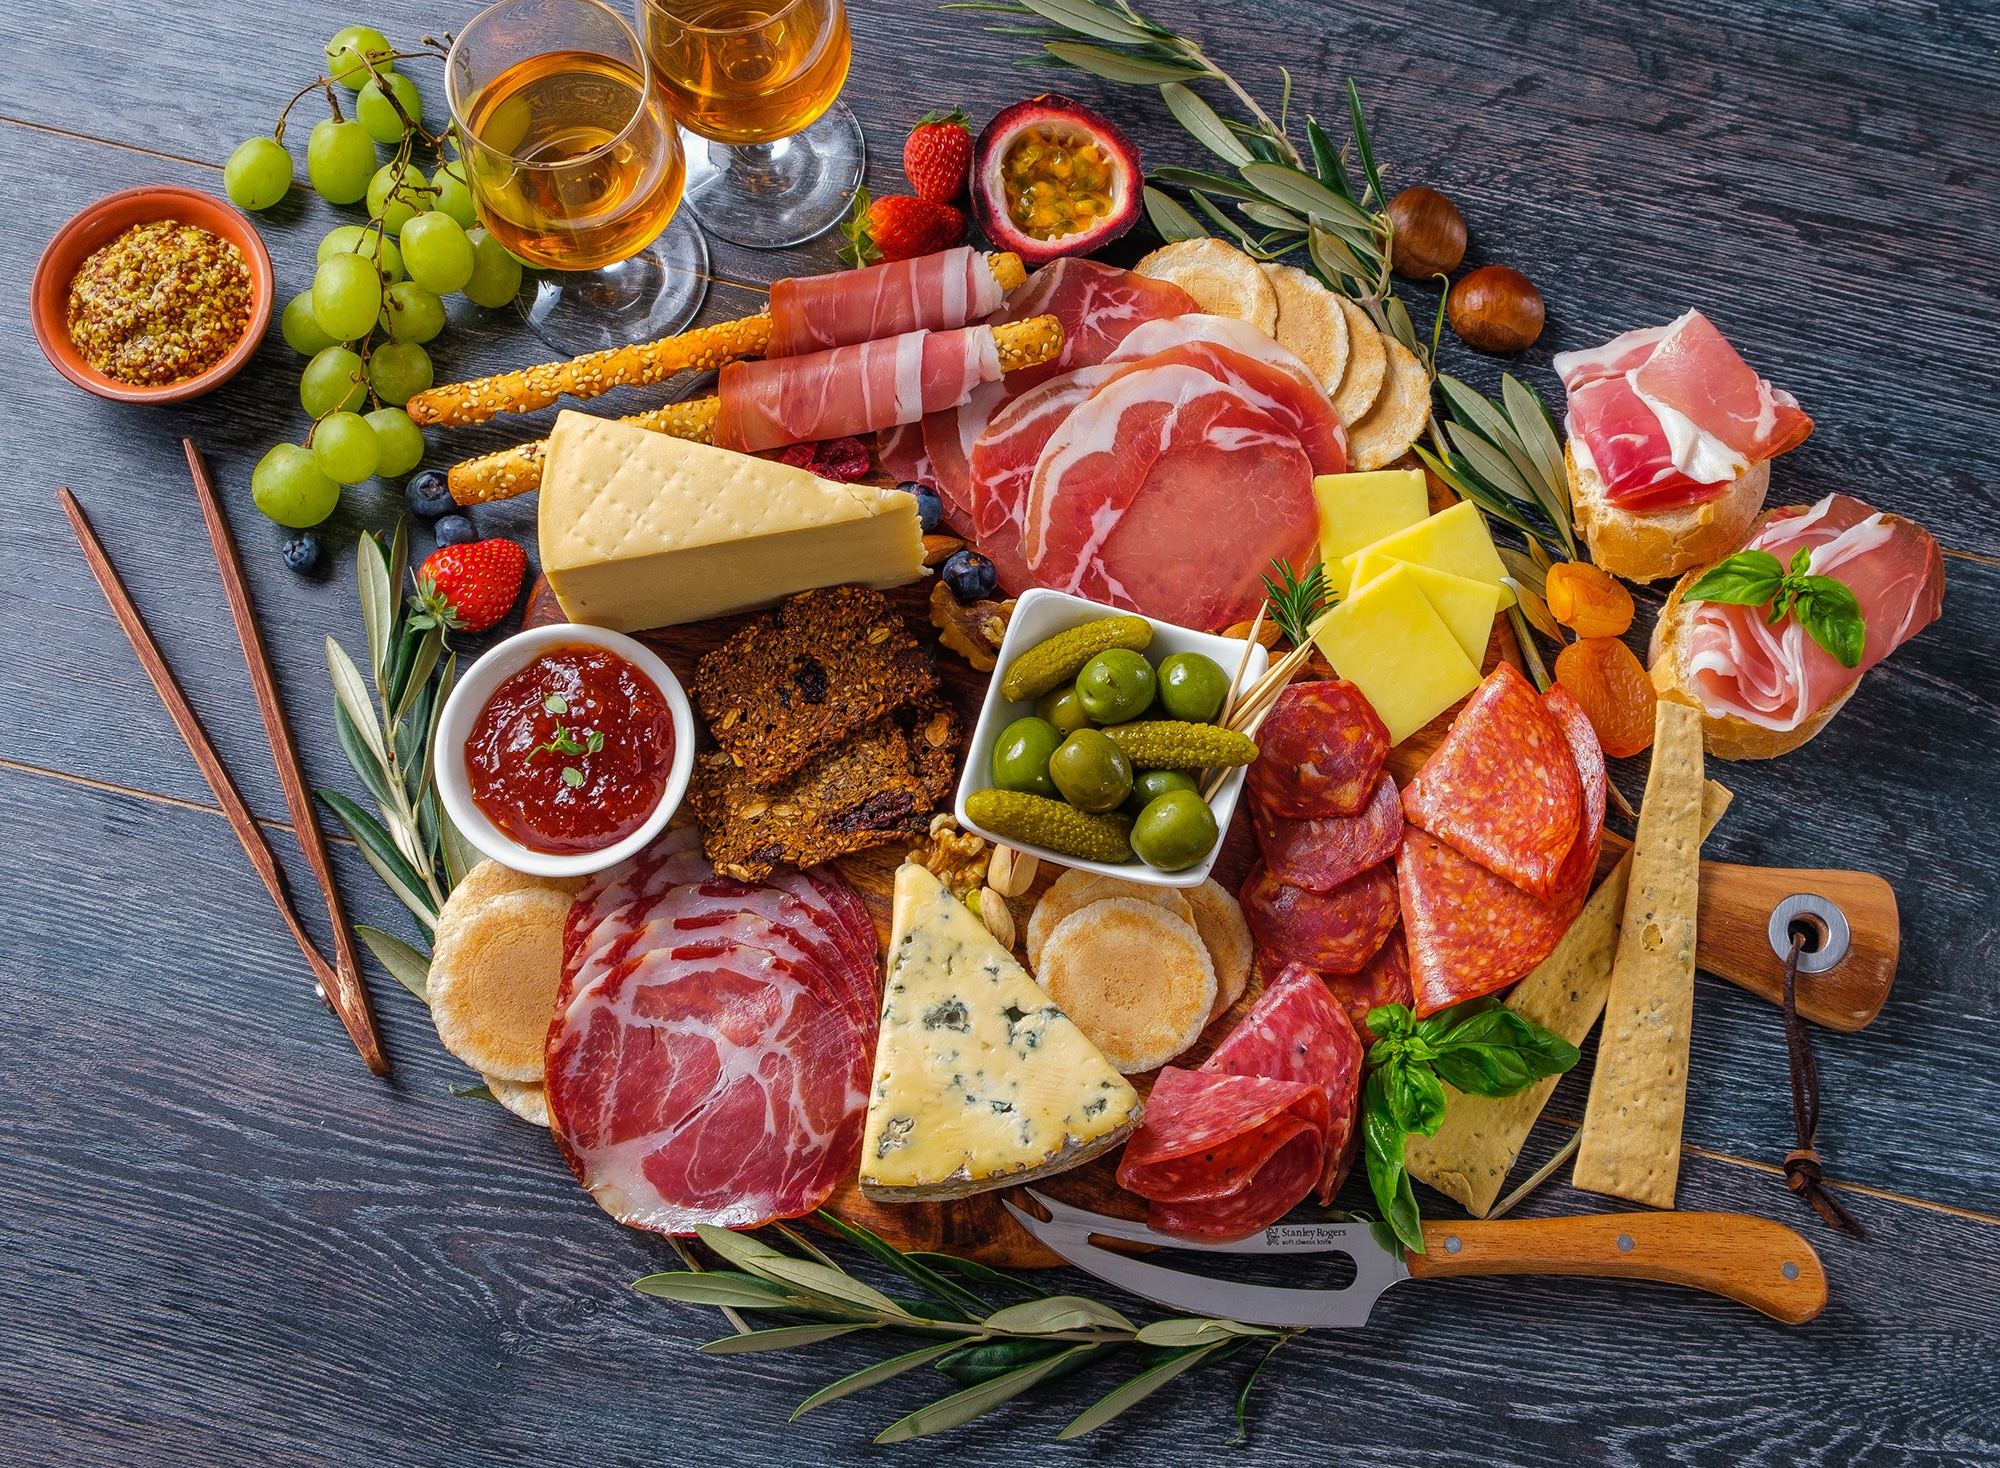 Build your charcuterie board